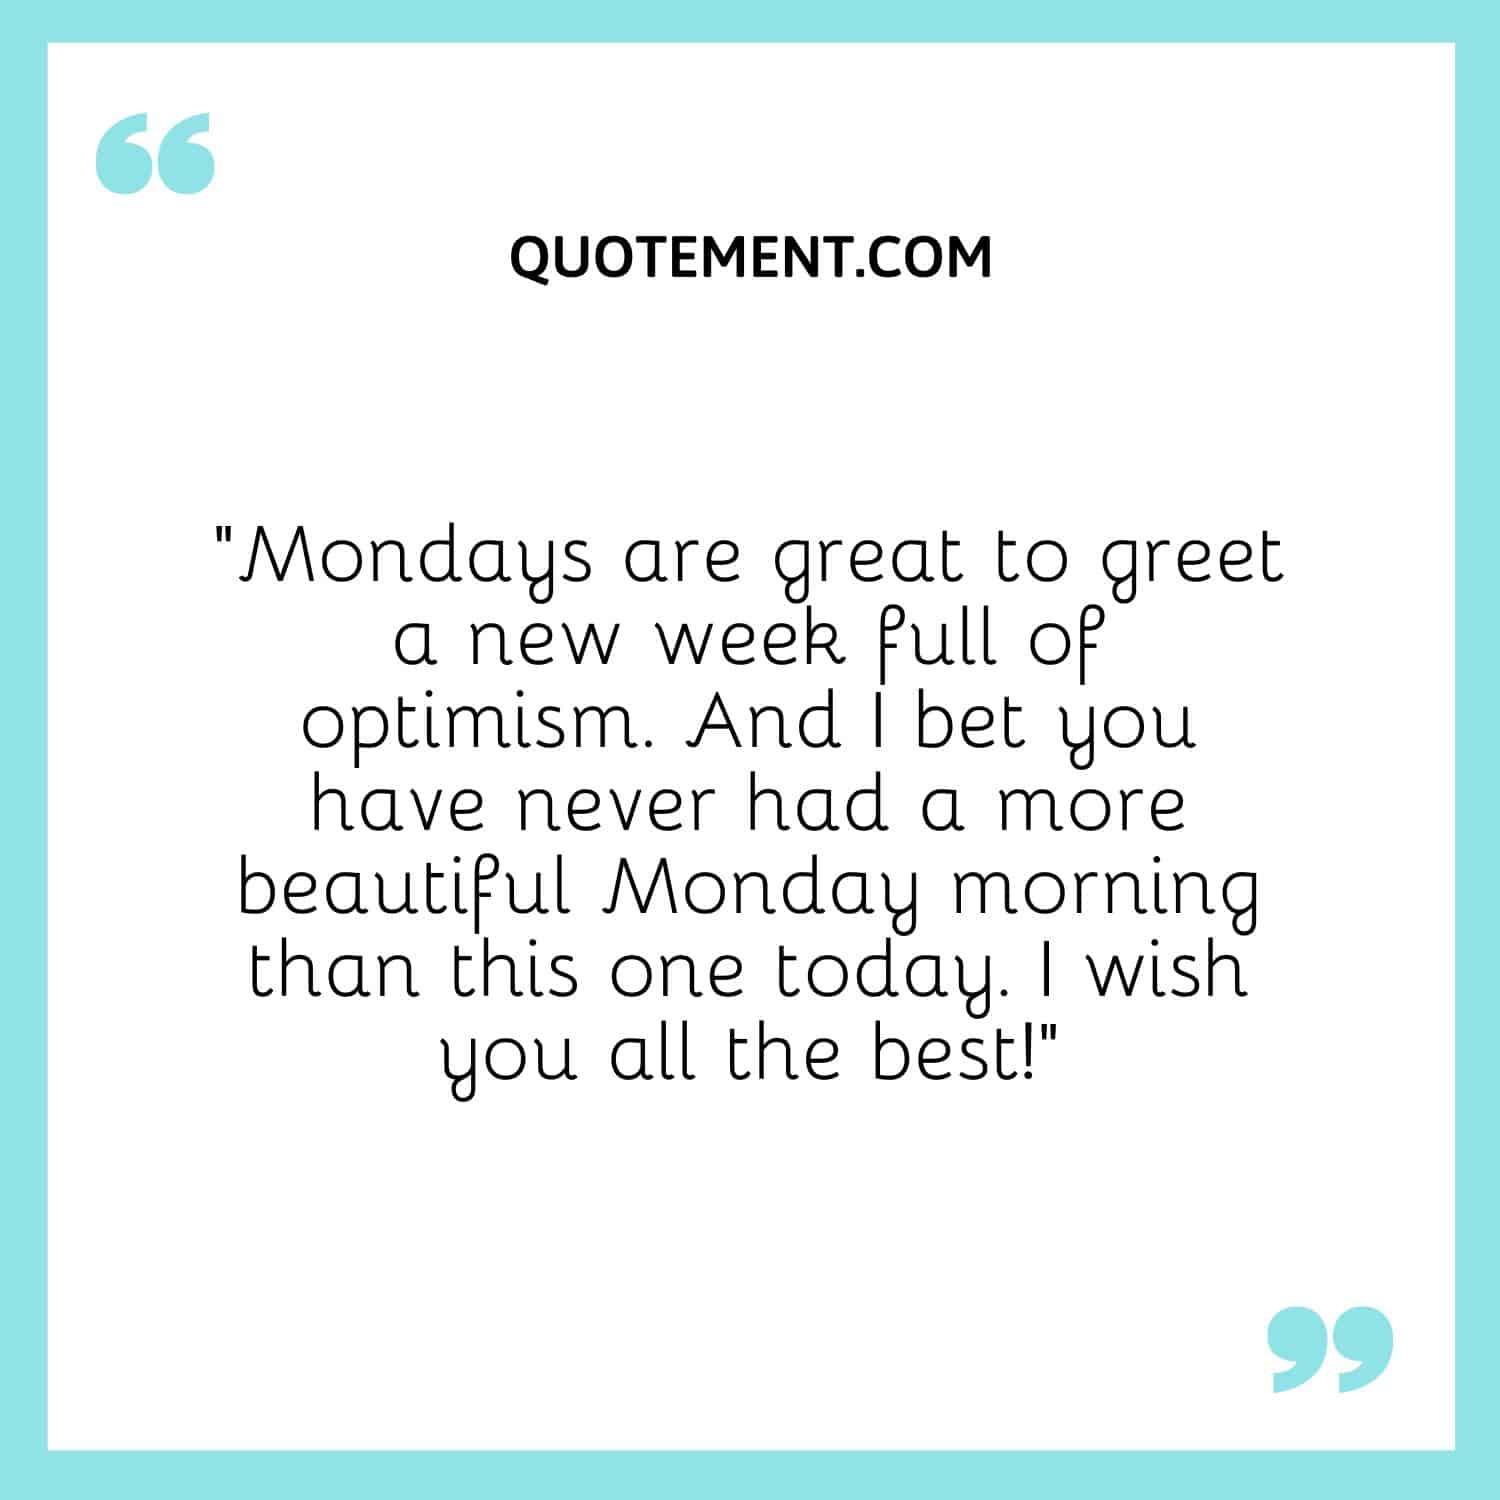 Mondays are great to greet a new week full of optimism